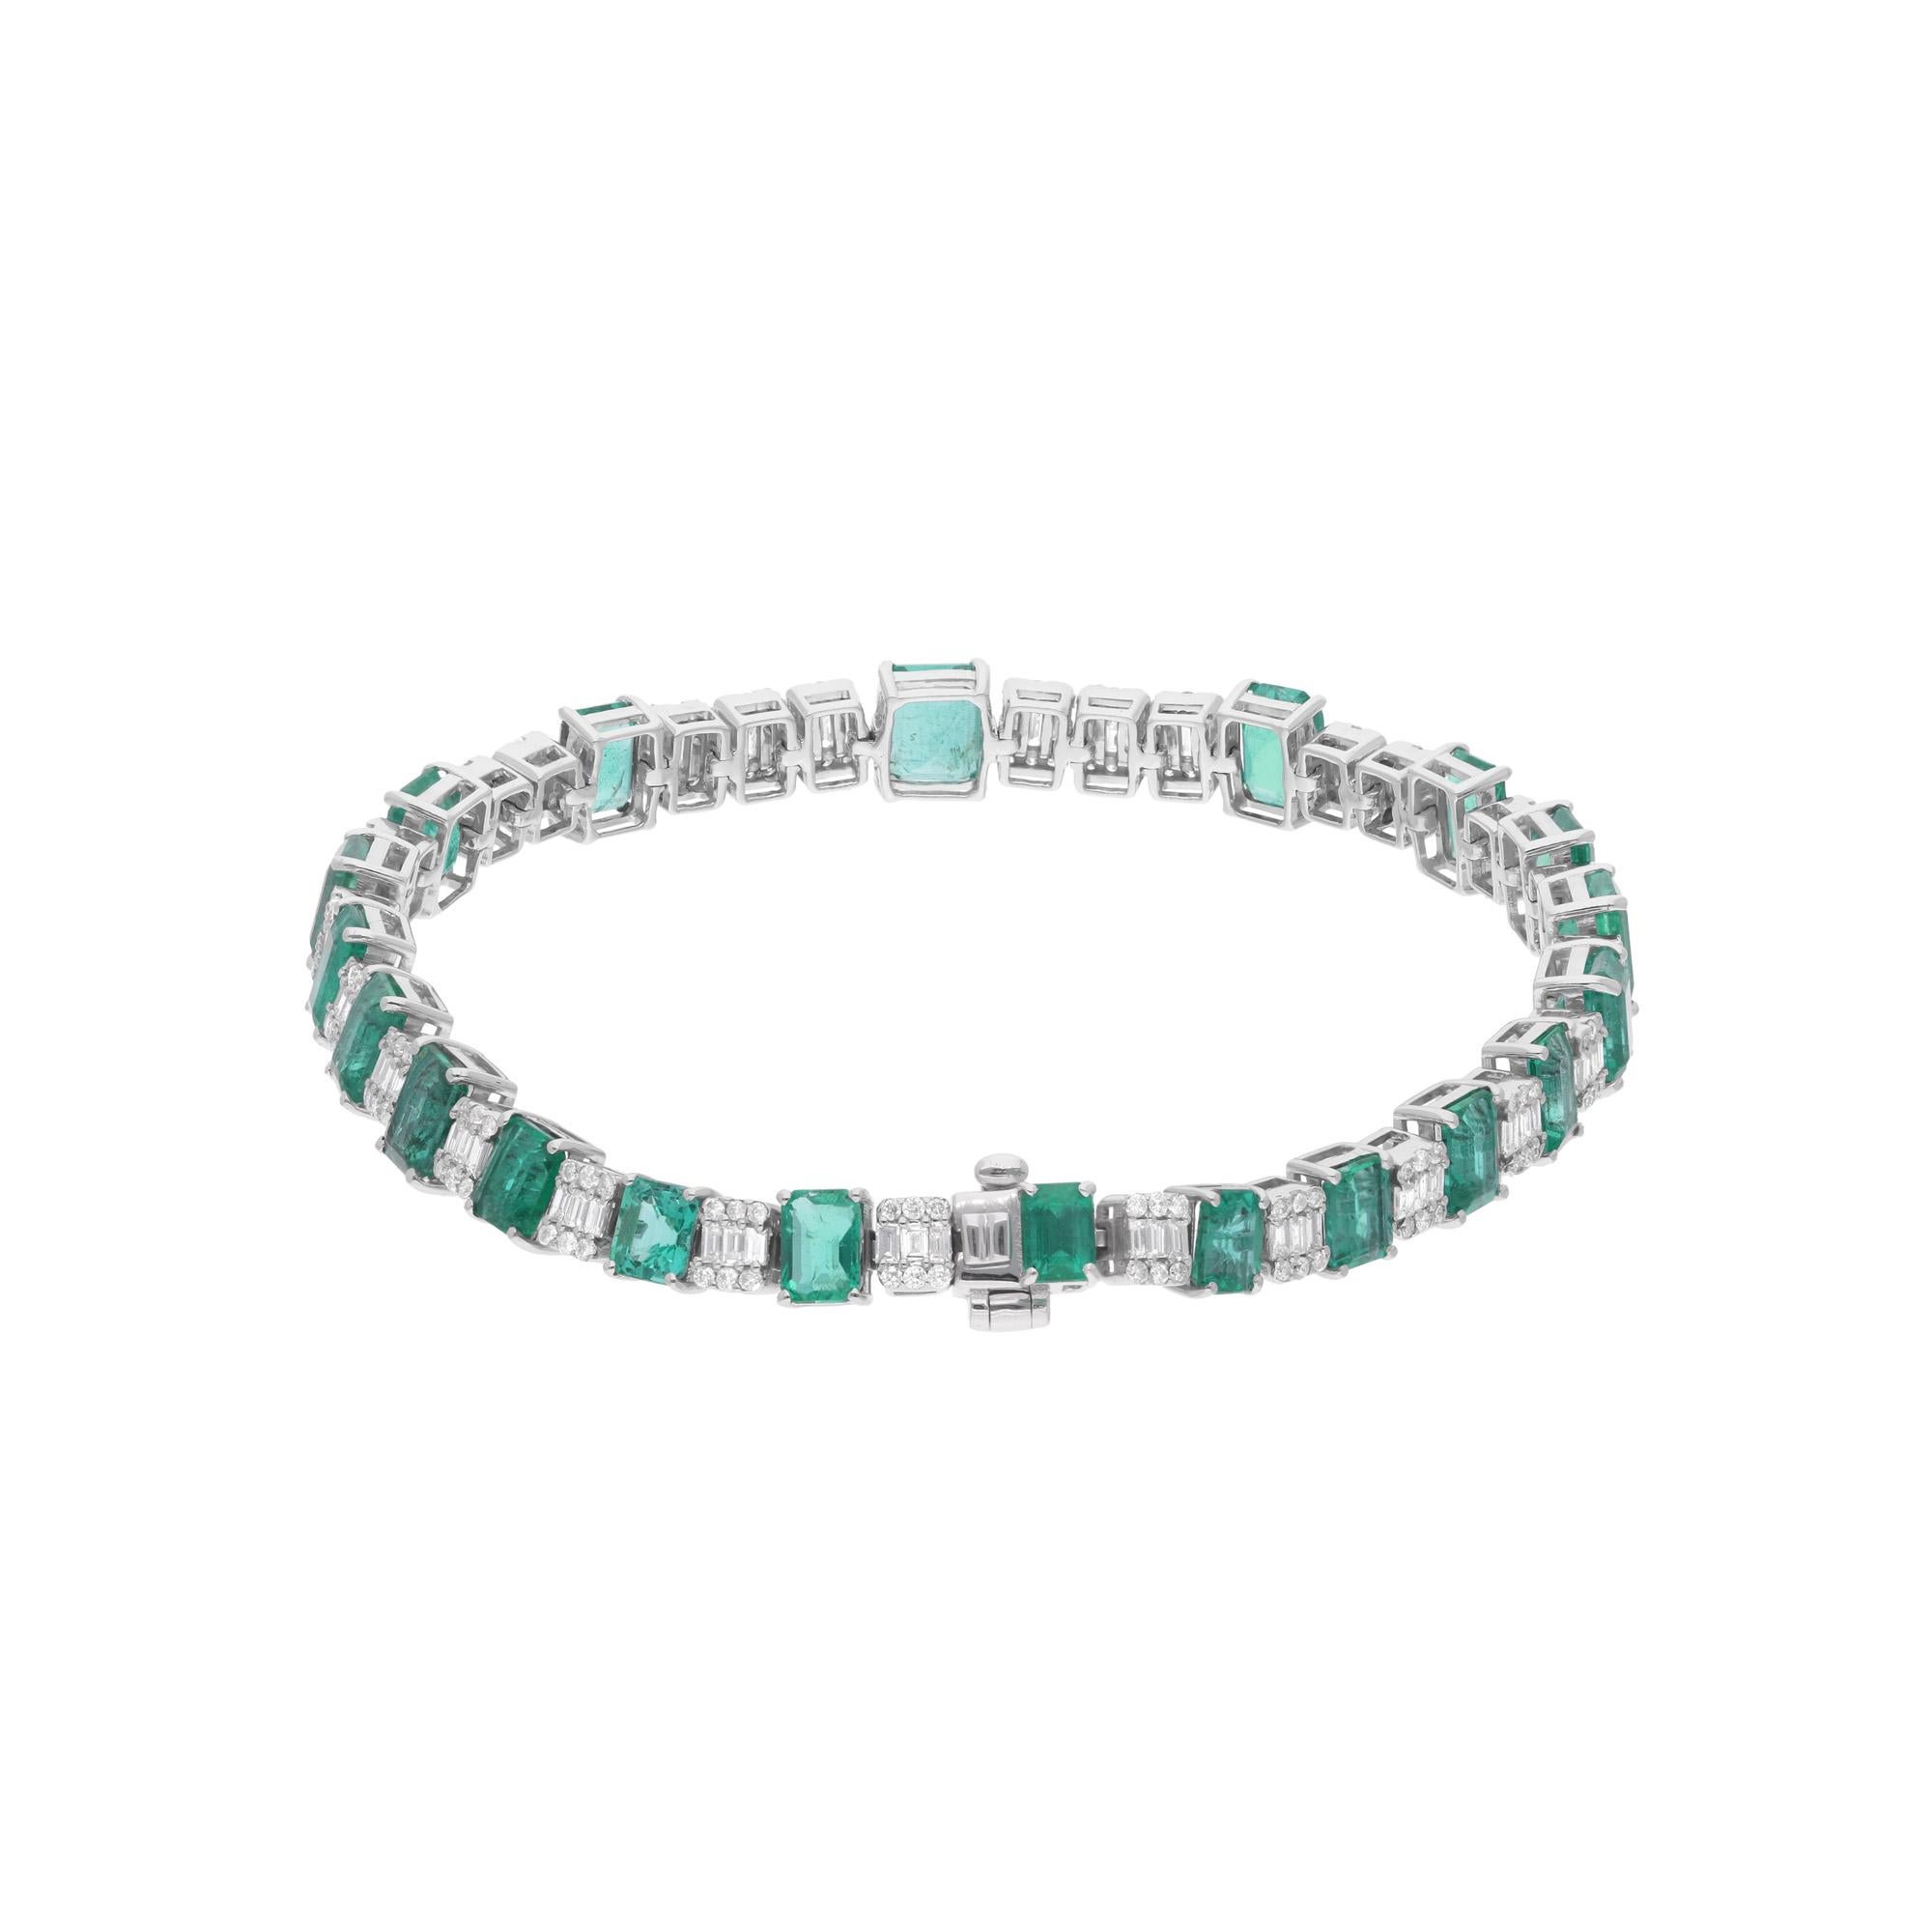 Central to the bracelet's design are the stunning Zambian emerald gemstones, each carefully selected for its rich green hue and exceptional clarity. These gemstones exude a captivating allure, reminiscent of lush landscapes and natural beauty.

Item